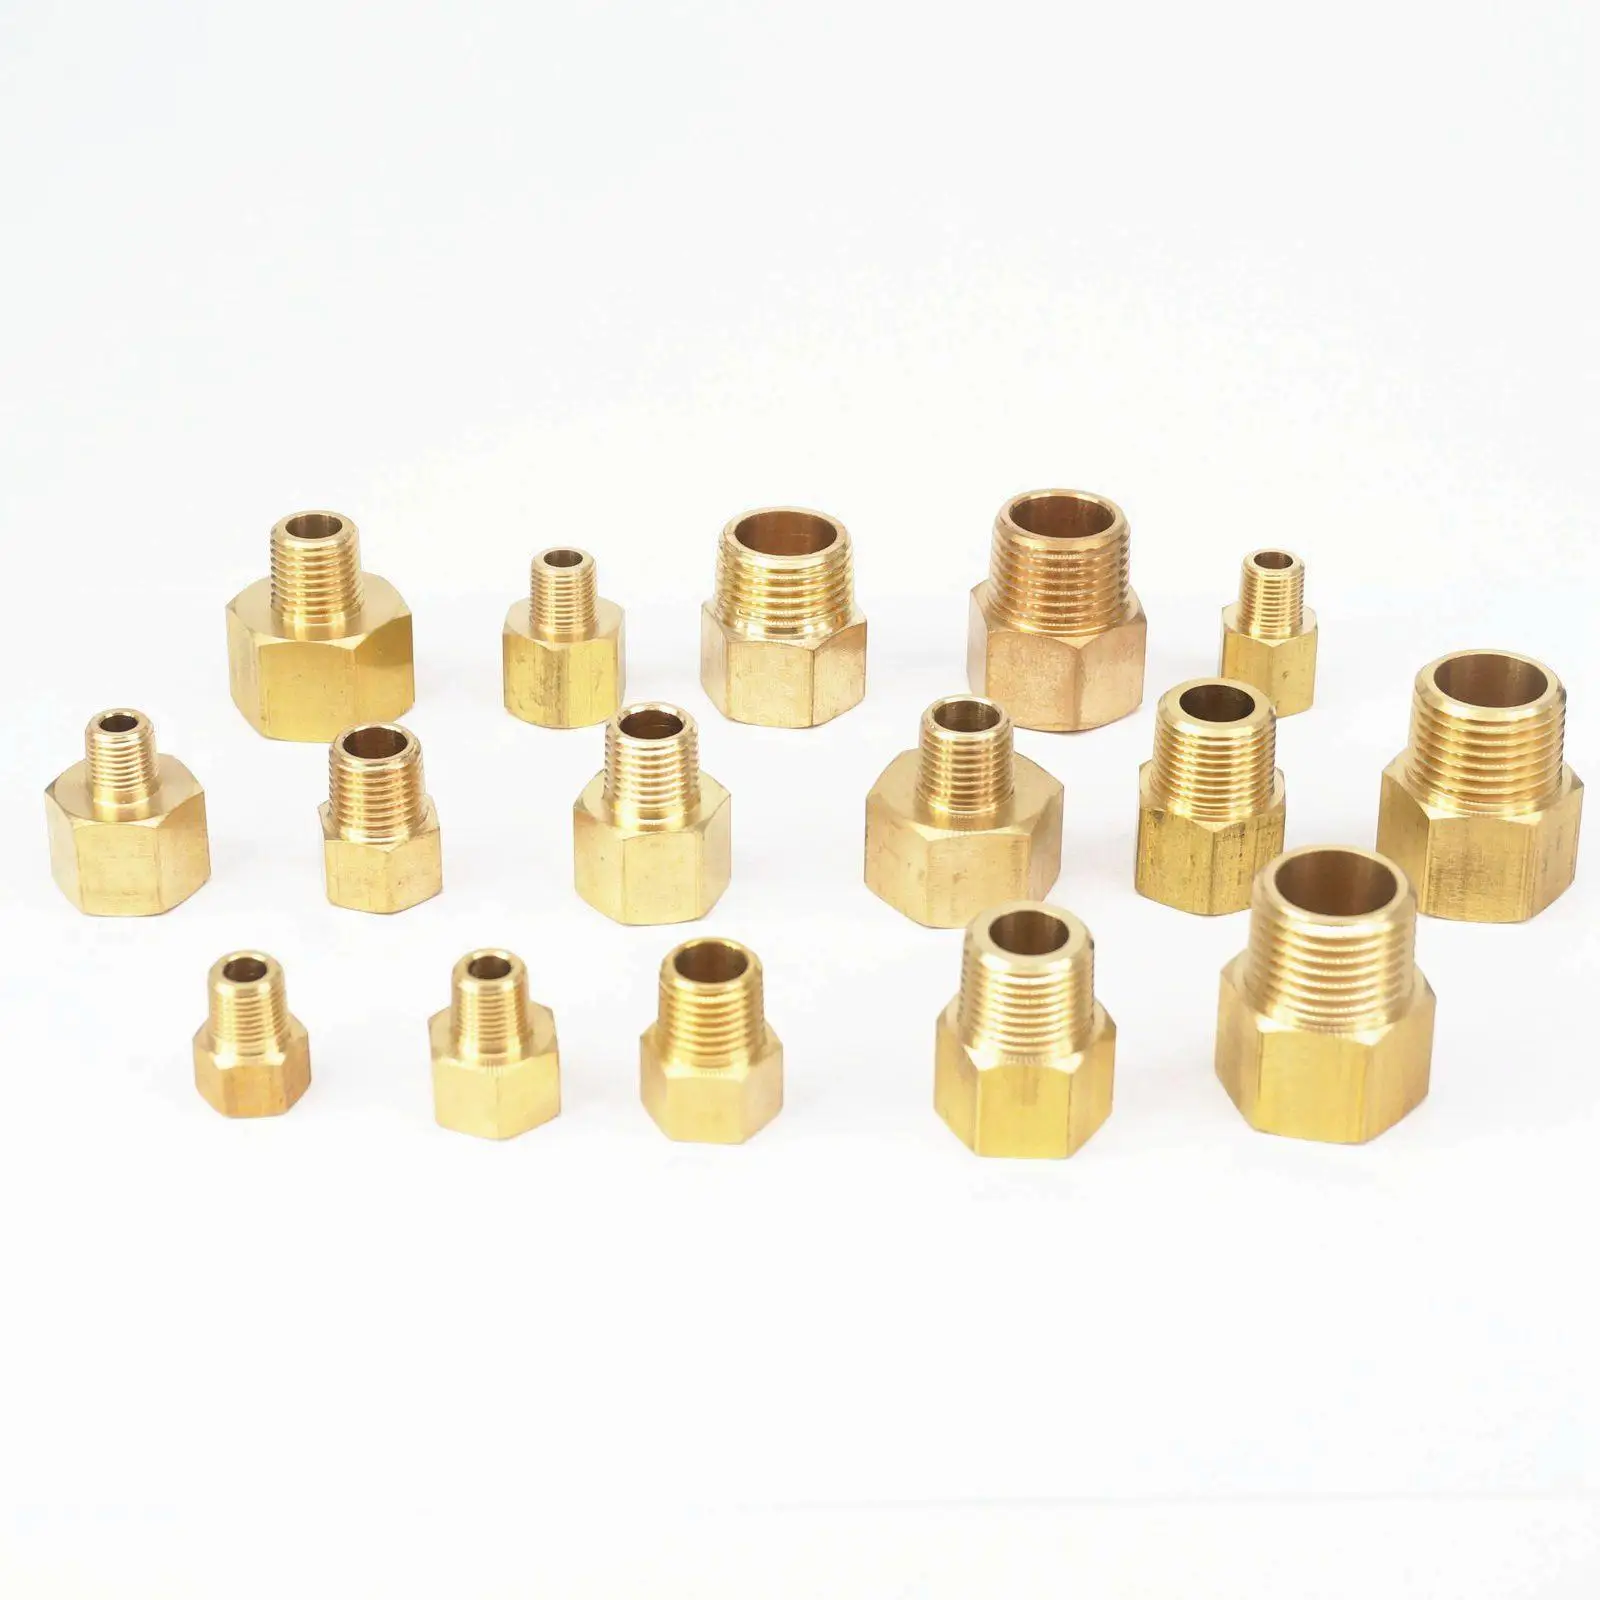 Details about   Brass Elbow Female Male BSP Thread Fitting Pipe Connector 1/8" 1/4" 3/8" 1/2" 